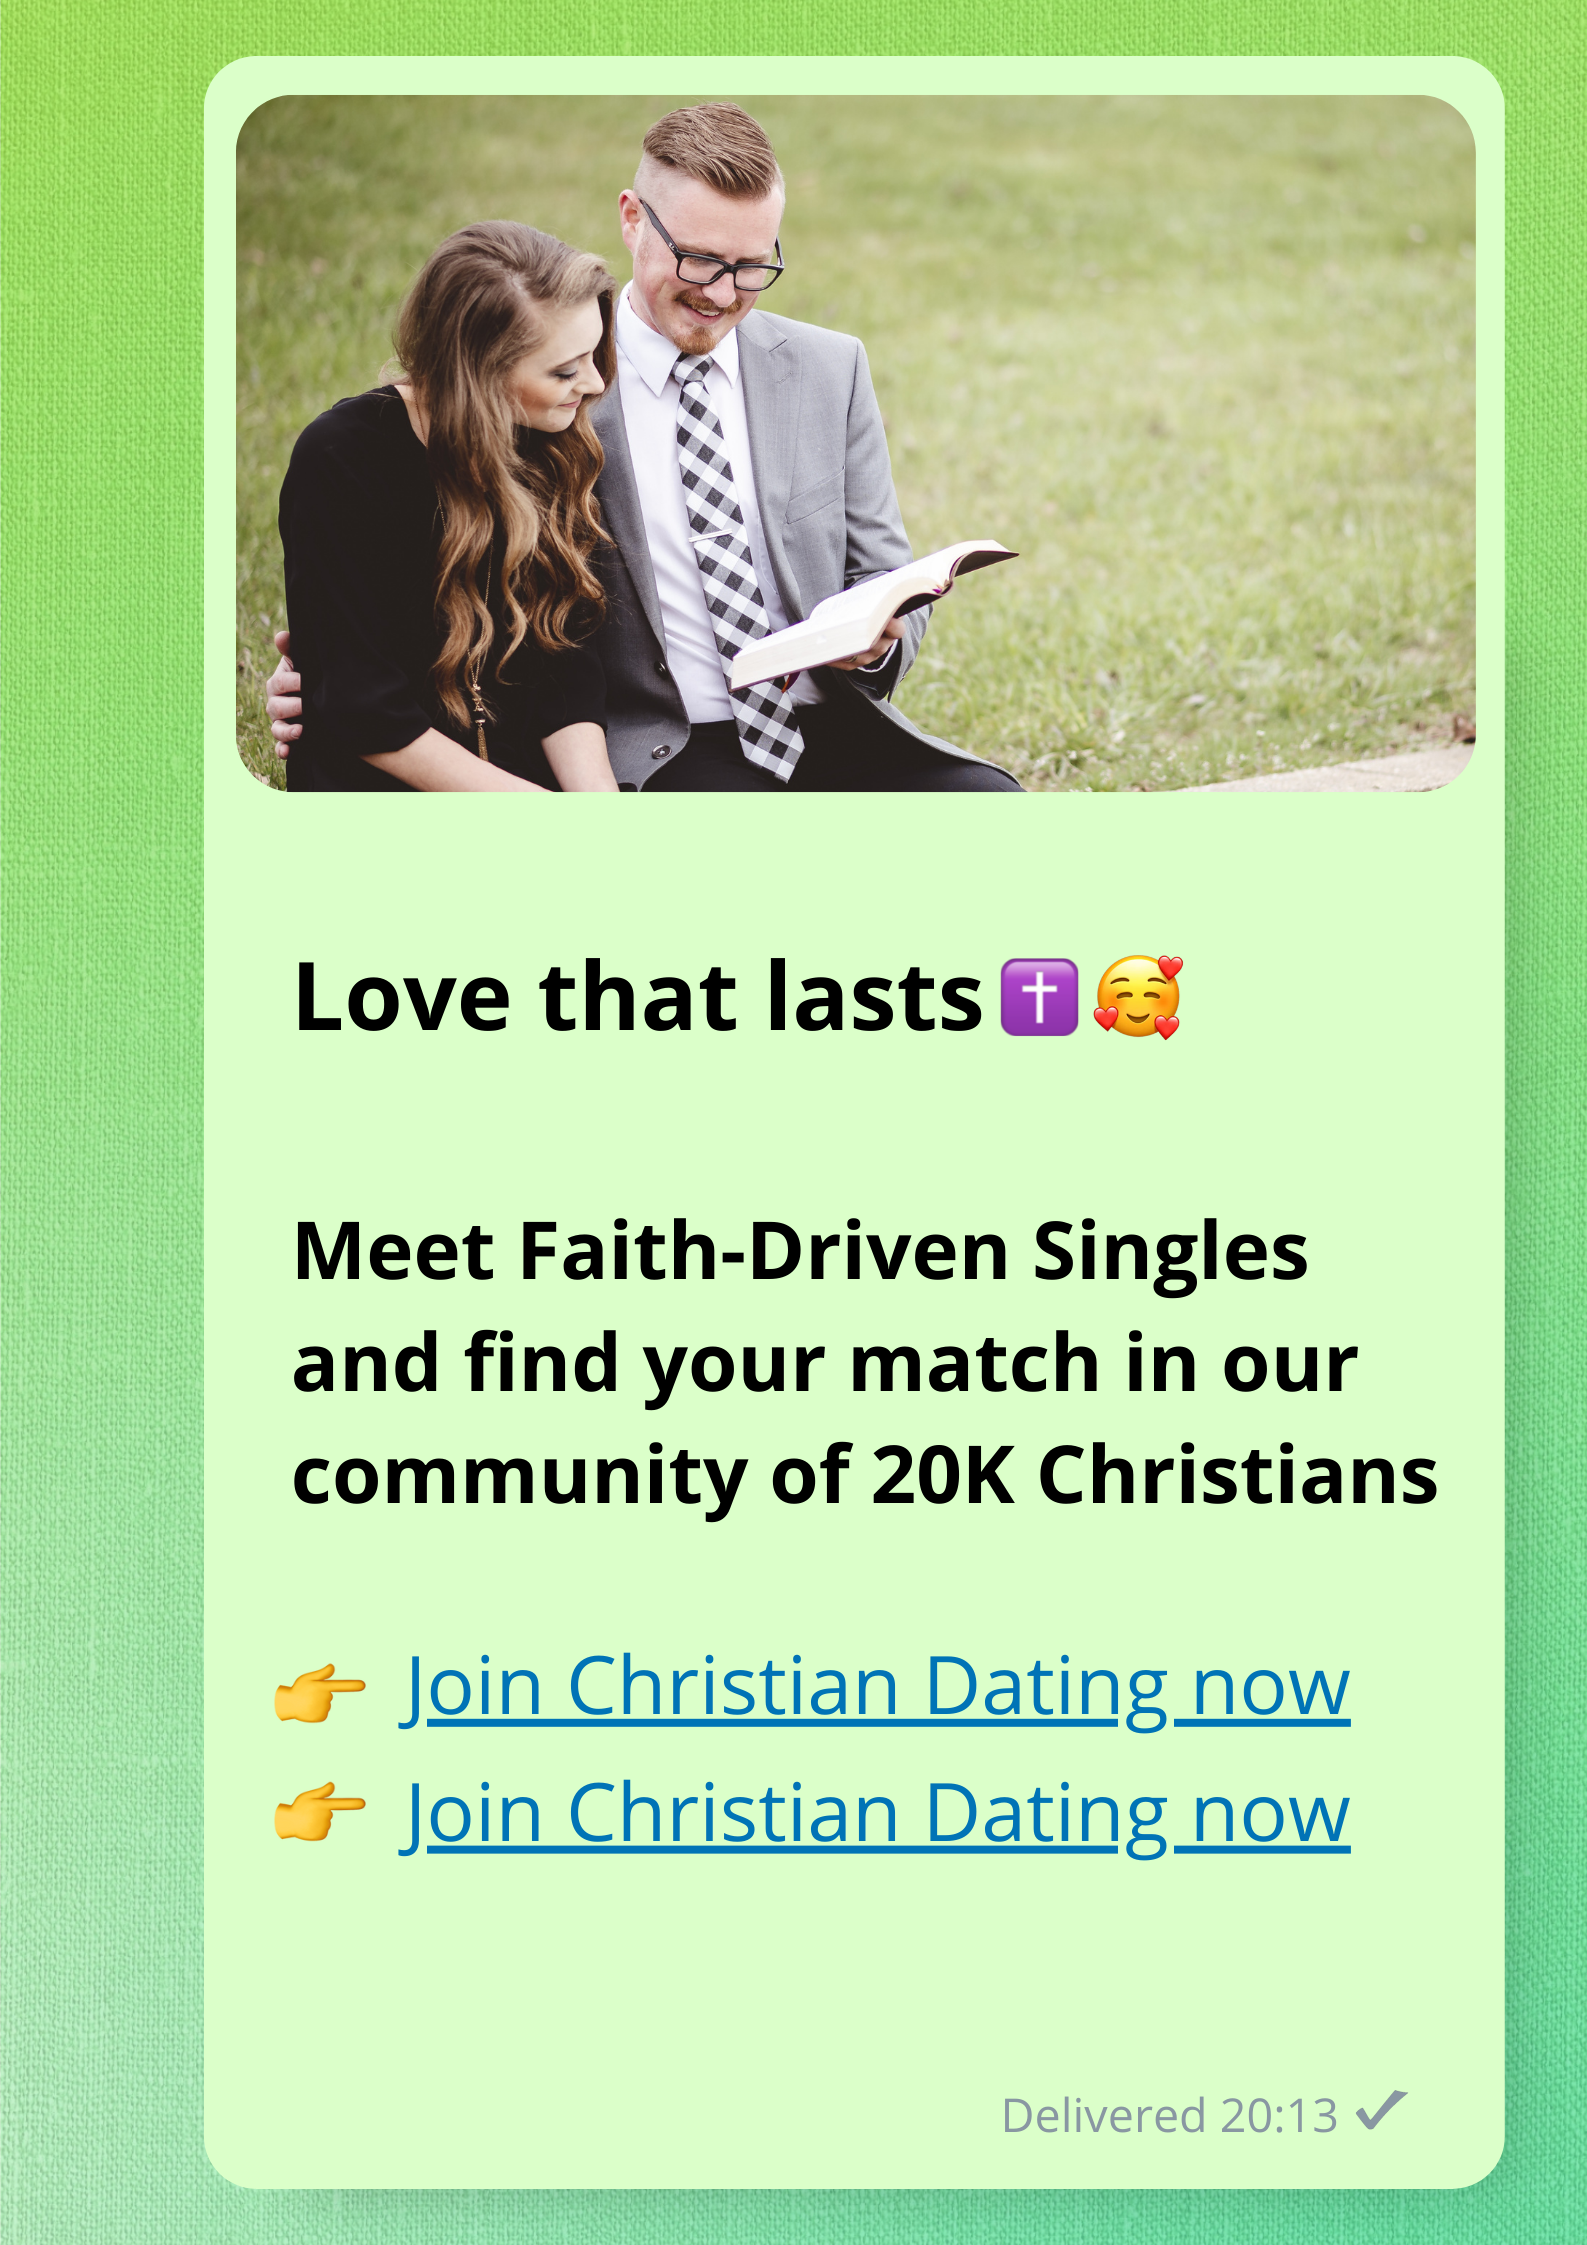 Christian dating traffic sources